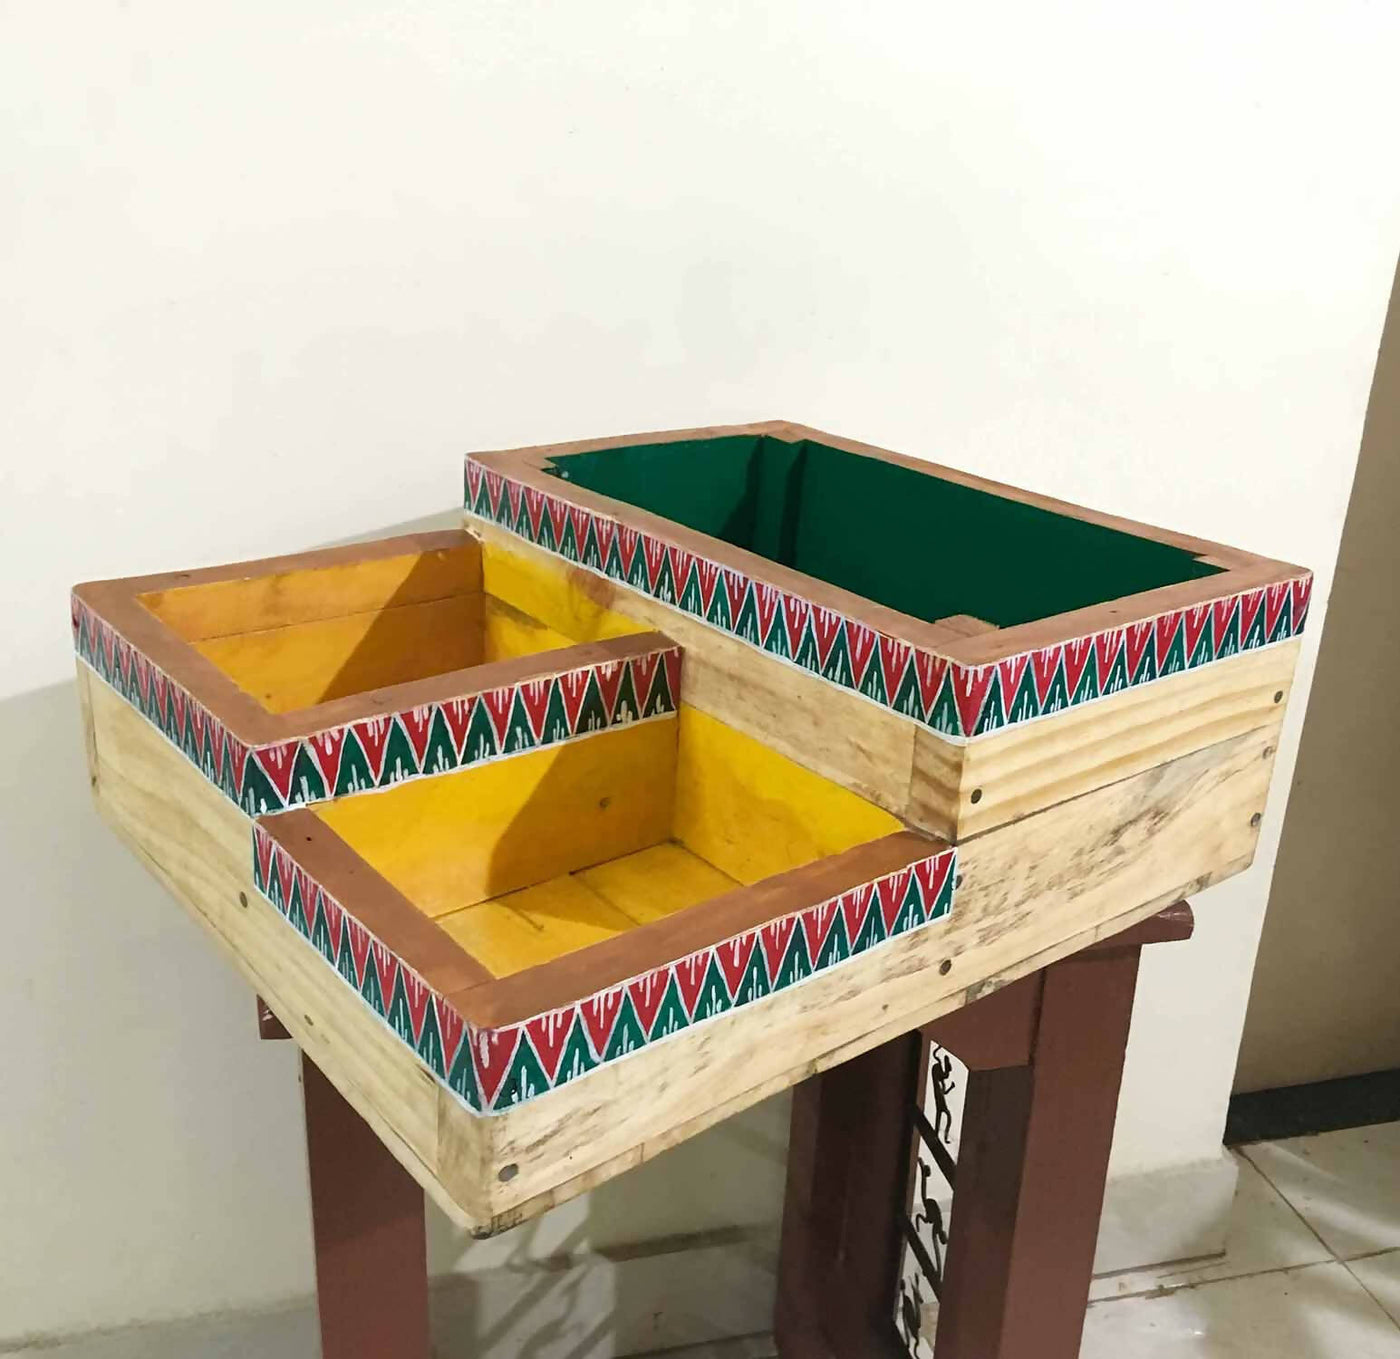 Hand Painted Wooden Planter with 3 Sections - Decor & Living - 1